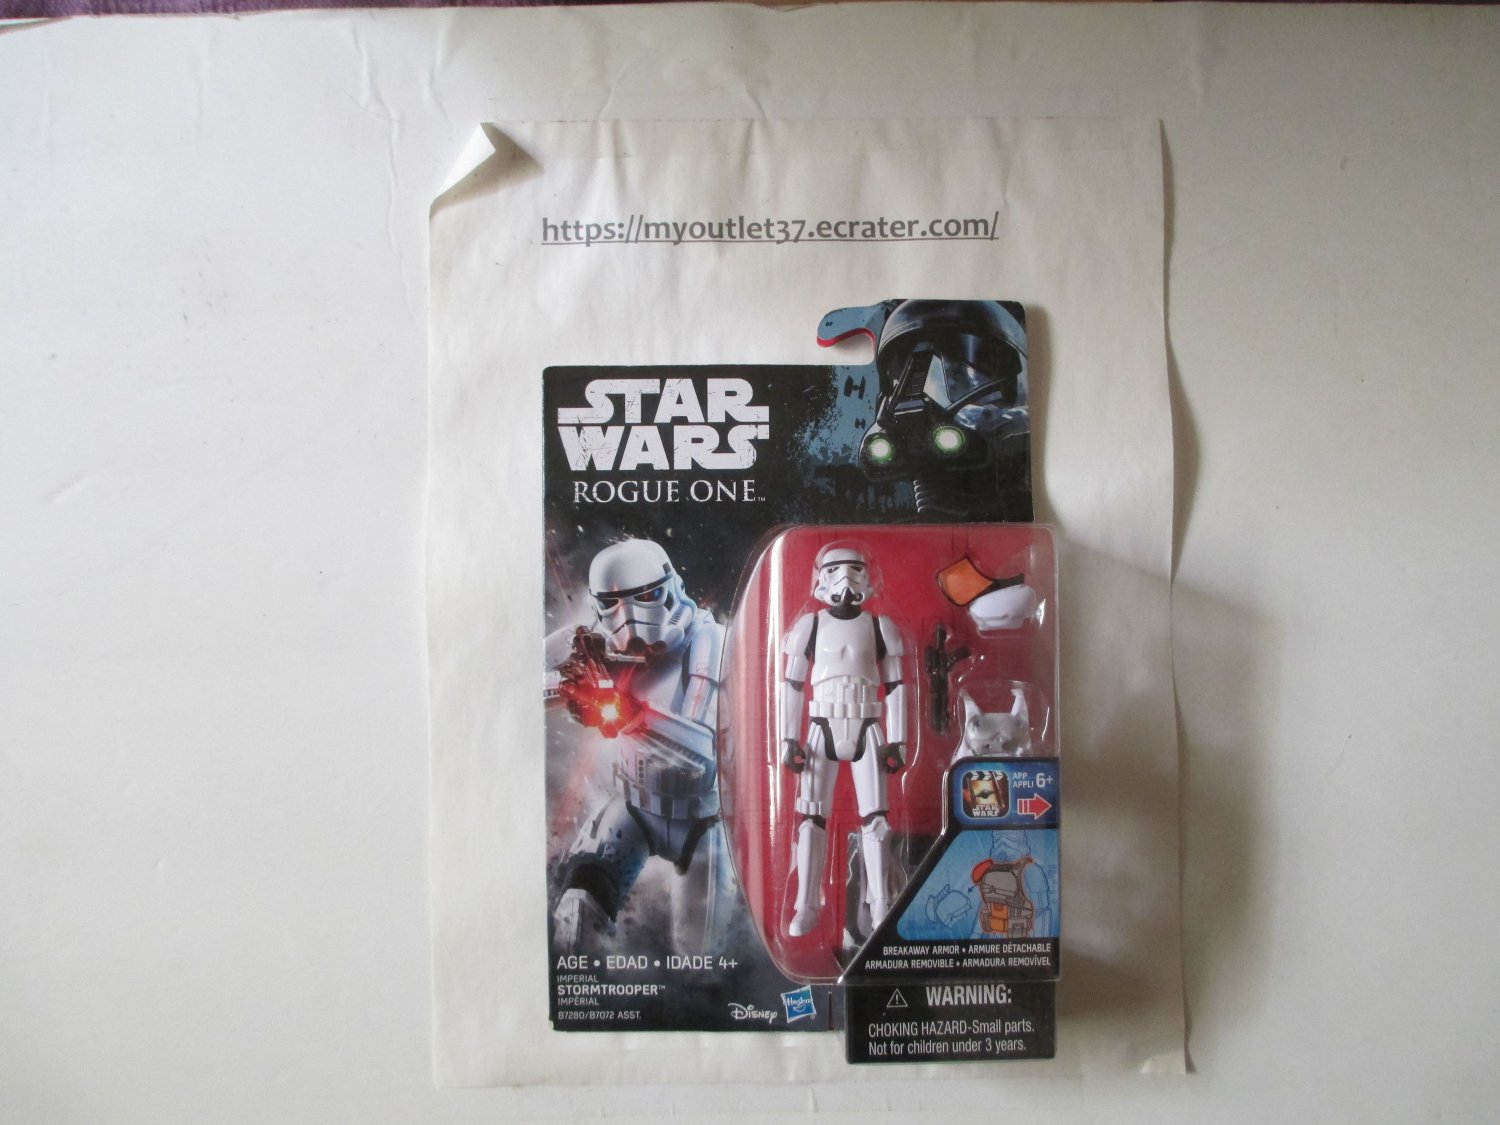 Star Wars - Imperial Stormtrooper - Action Figure 3.75" - Brand New